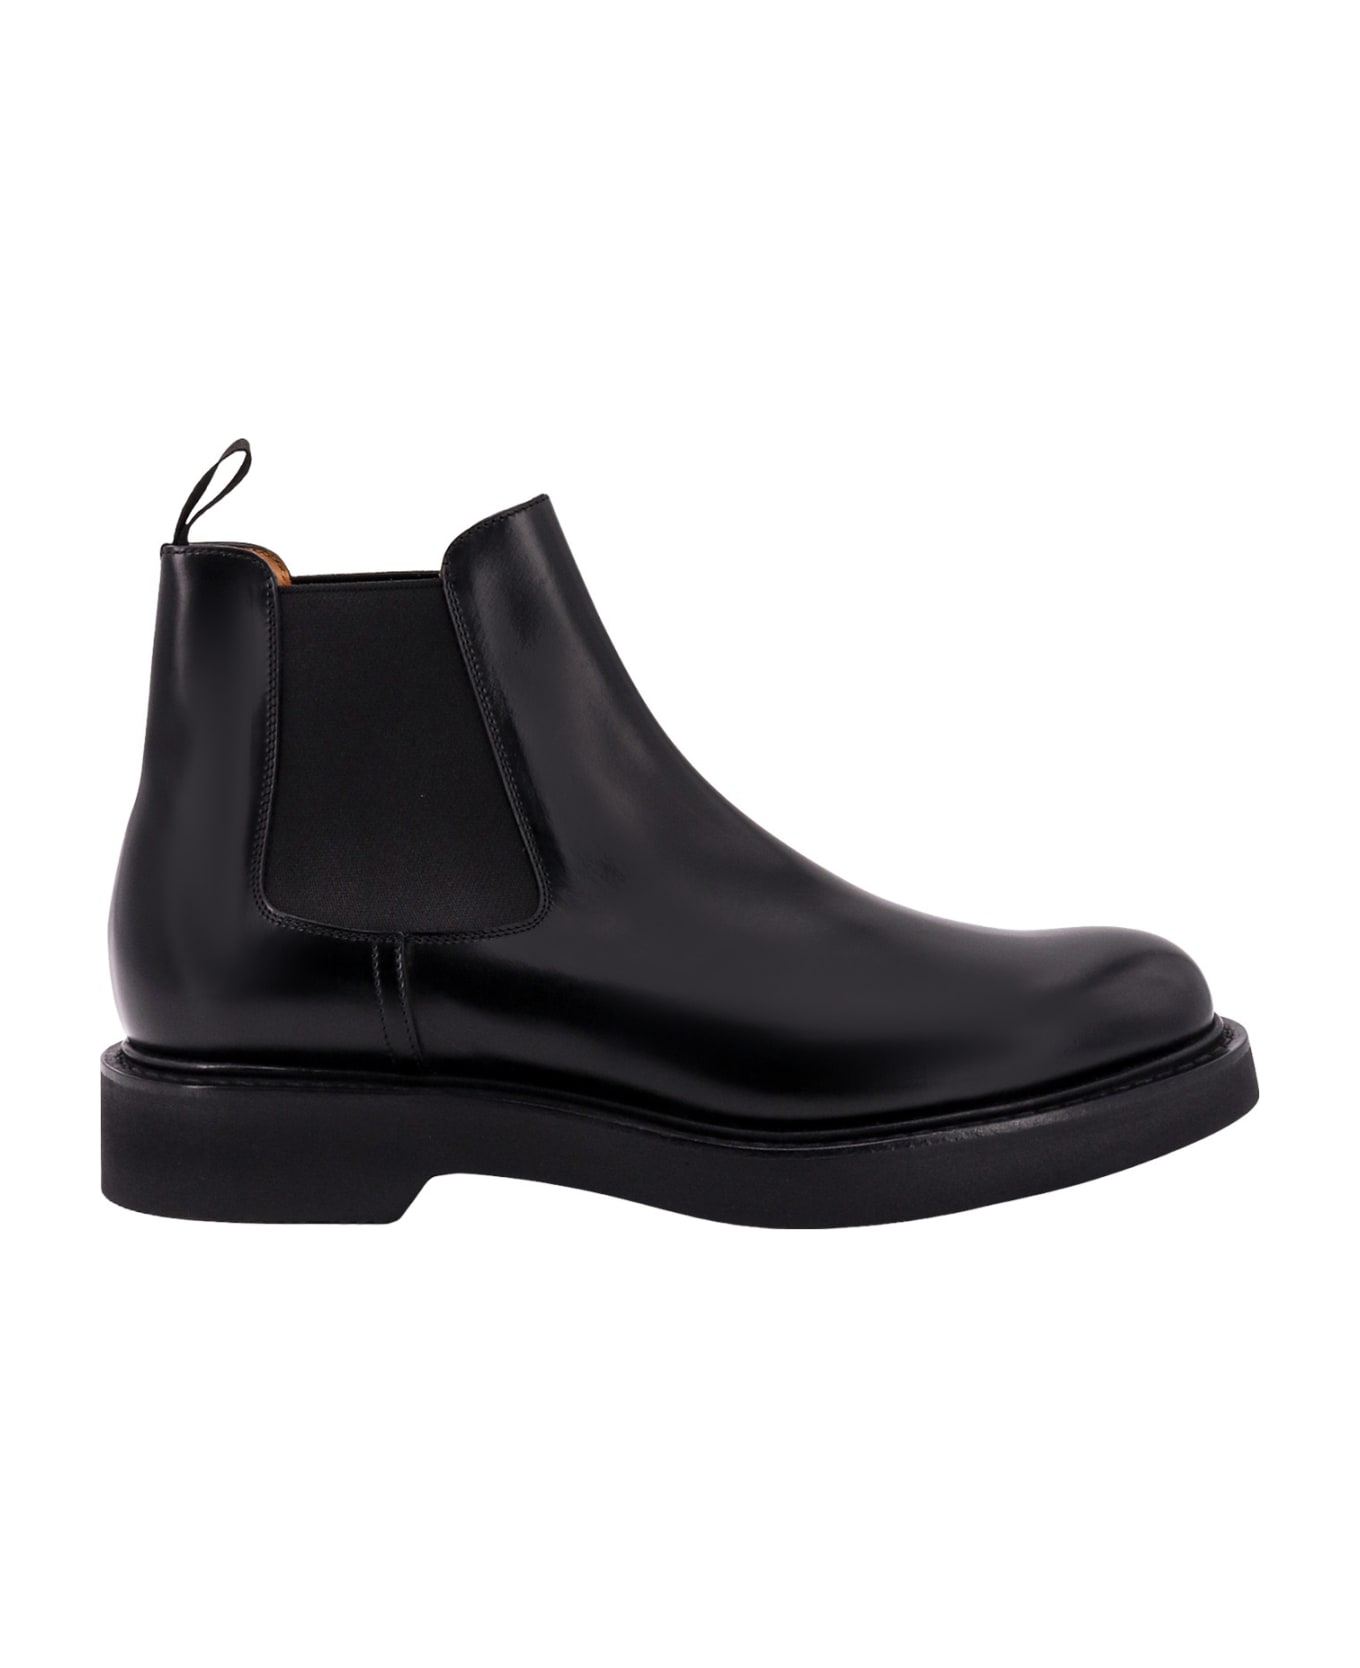 Church's Leicester Boots - Aab Black ブーツ